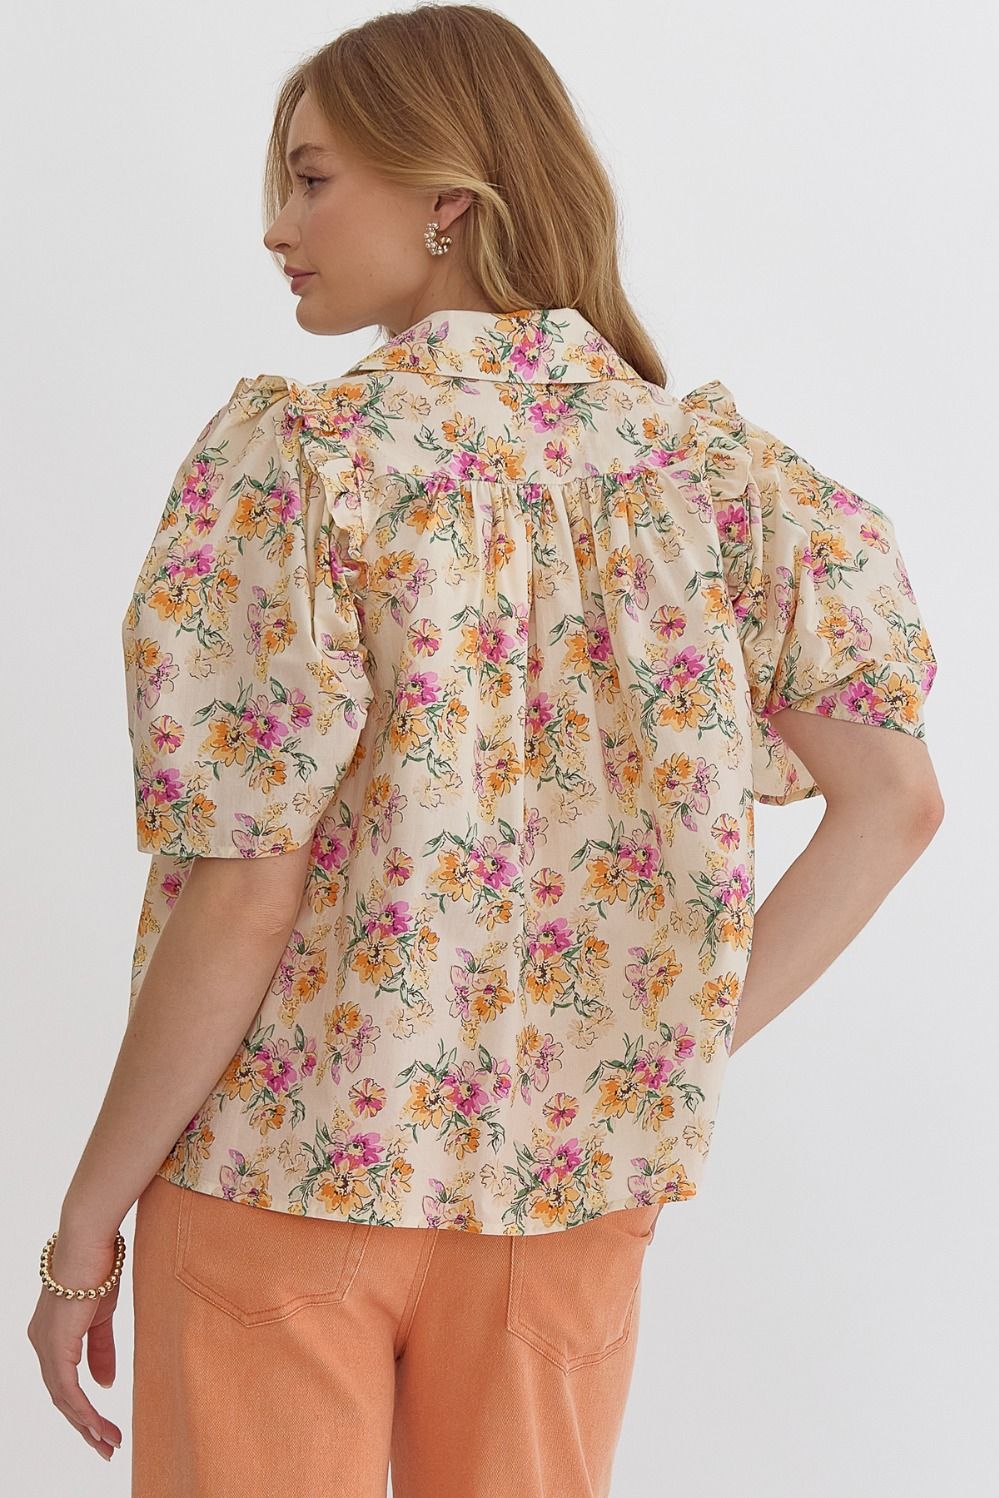 The Kendra Floral Top